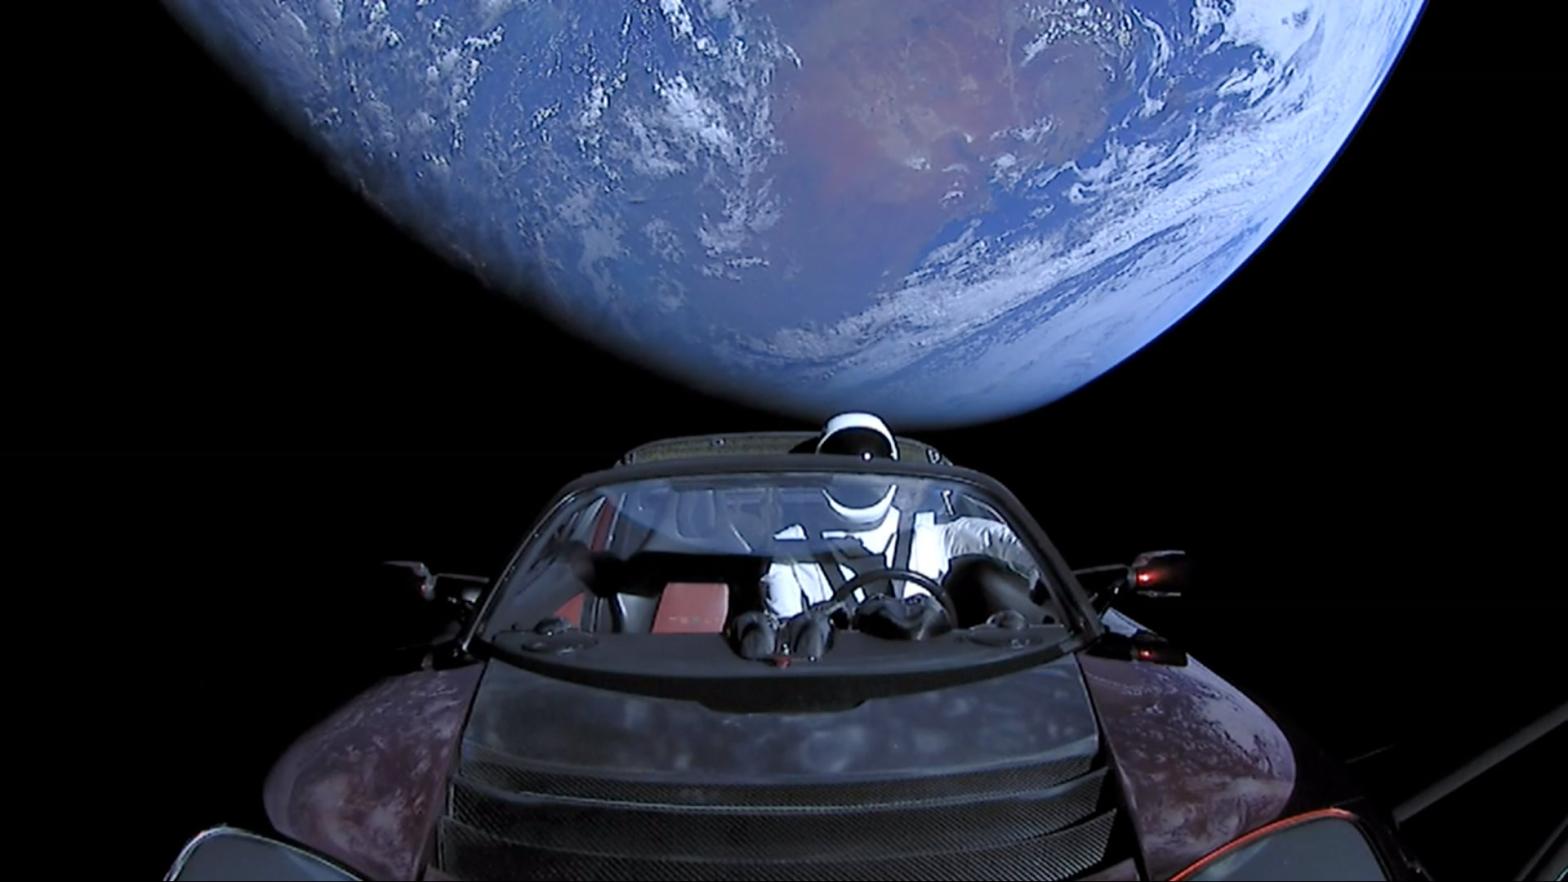 Elon Musk's Tesla Roadster and Starman manikin shortly after launch on February 6, 2018.  (Photo: SpaceX)